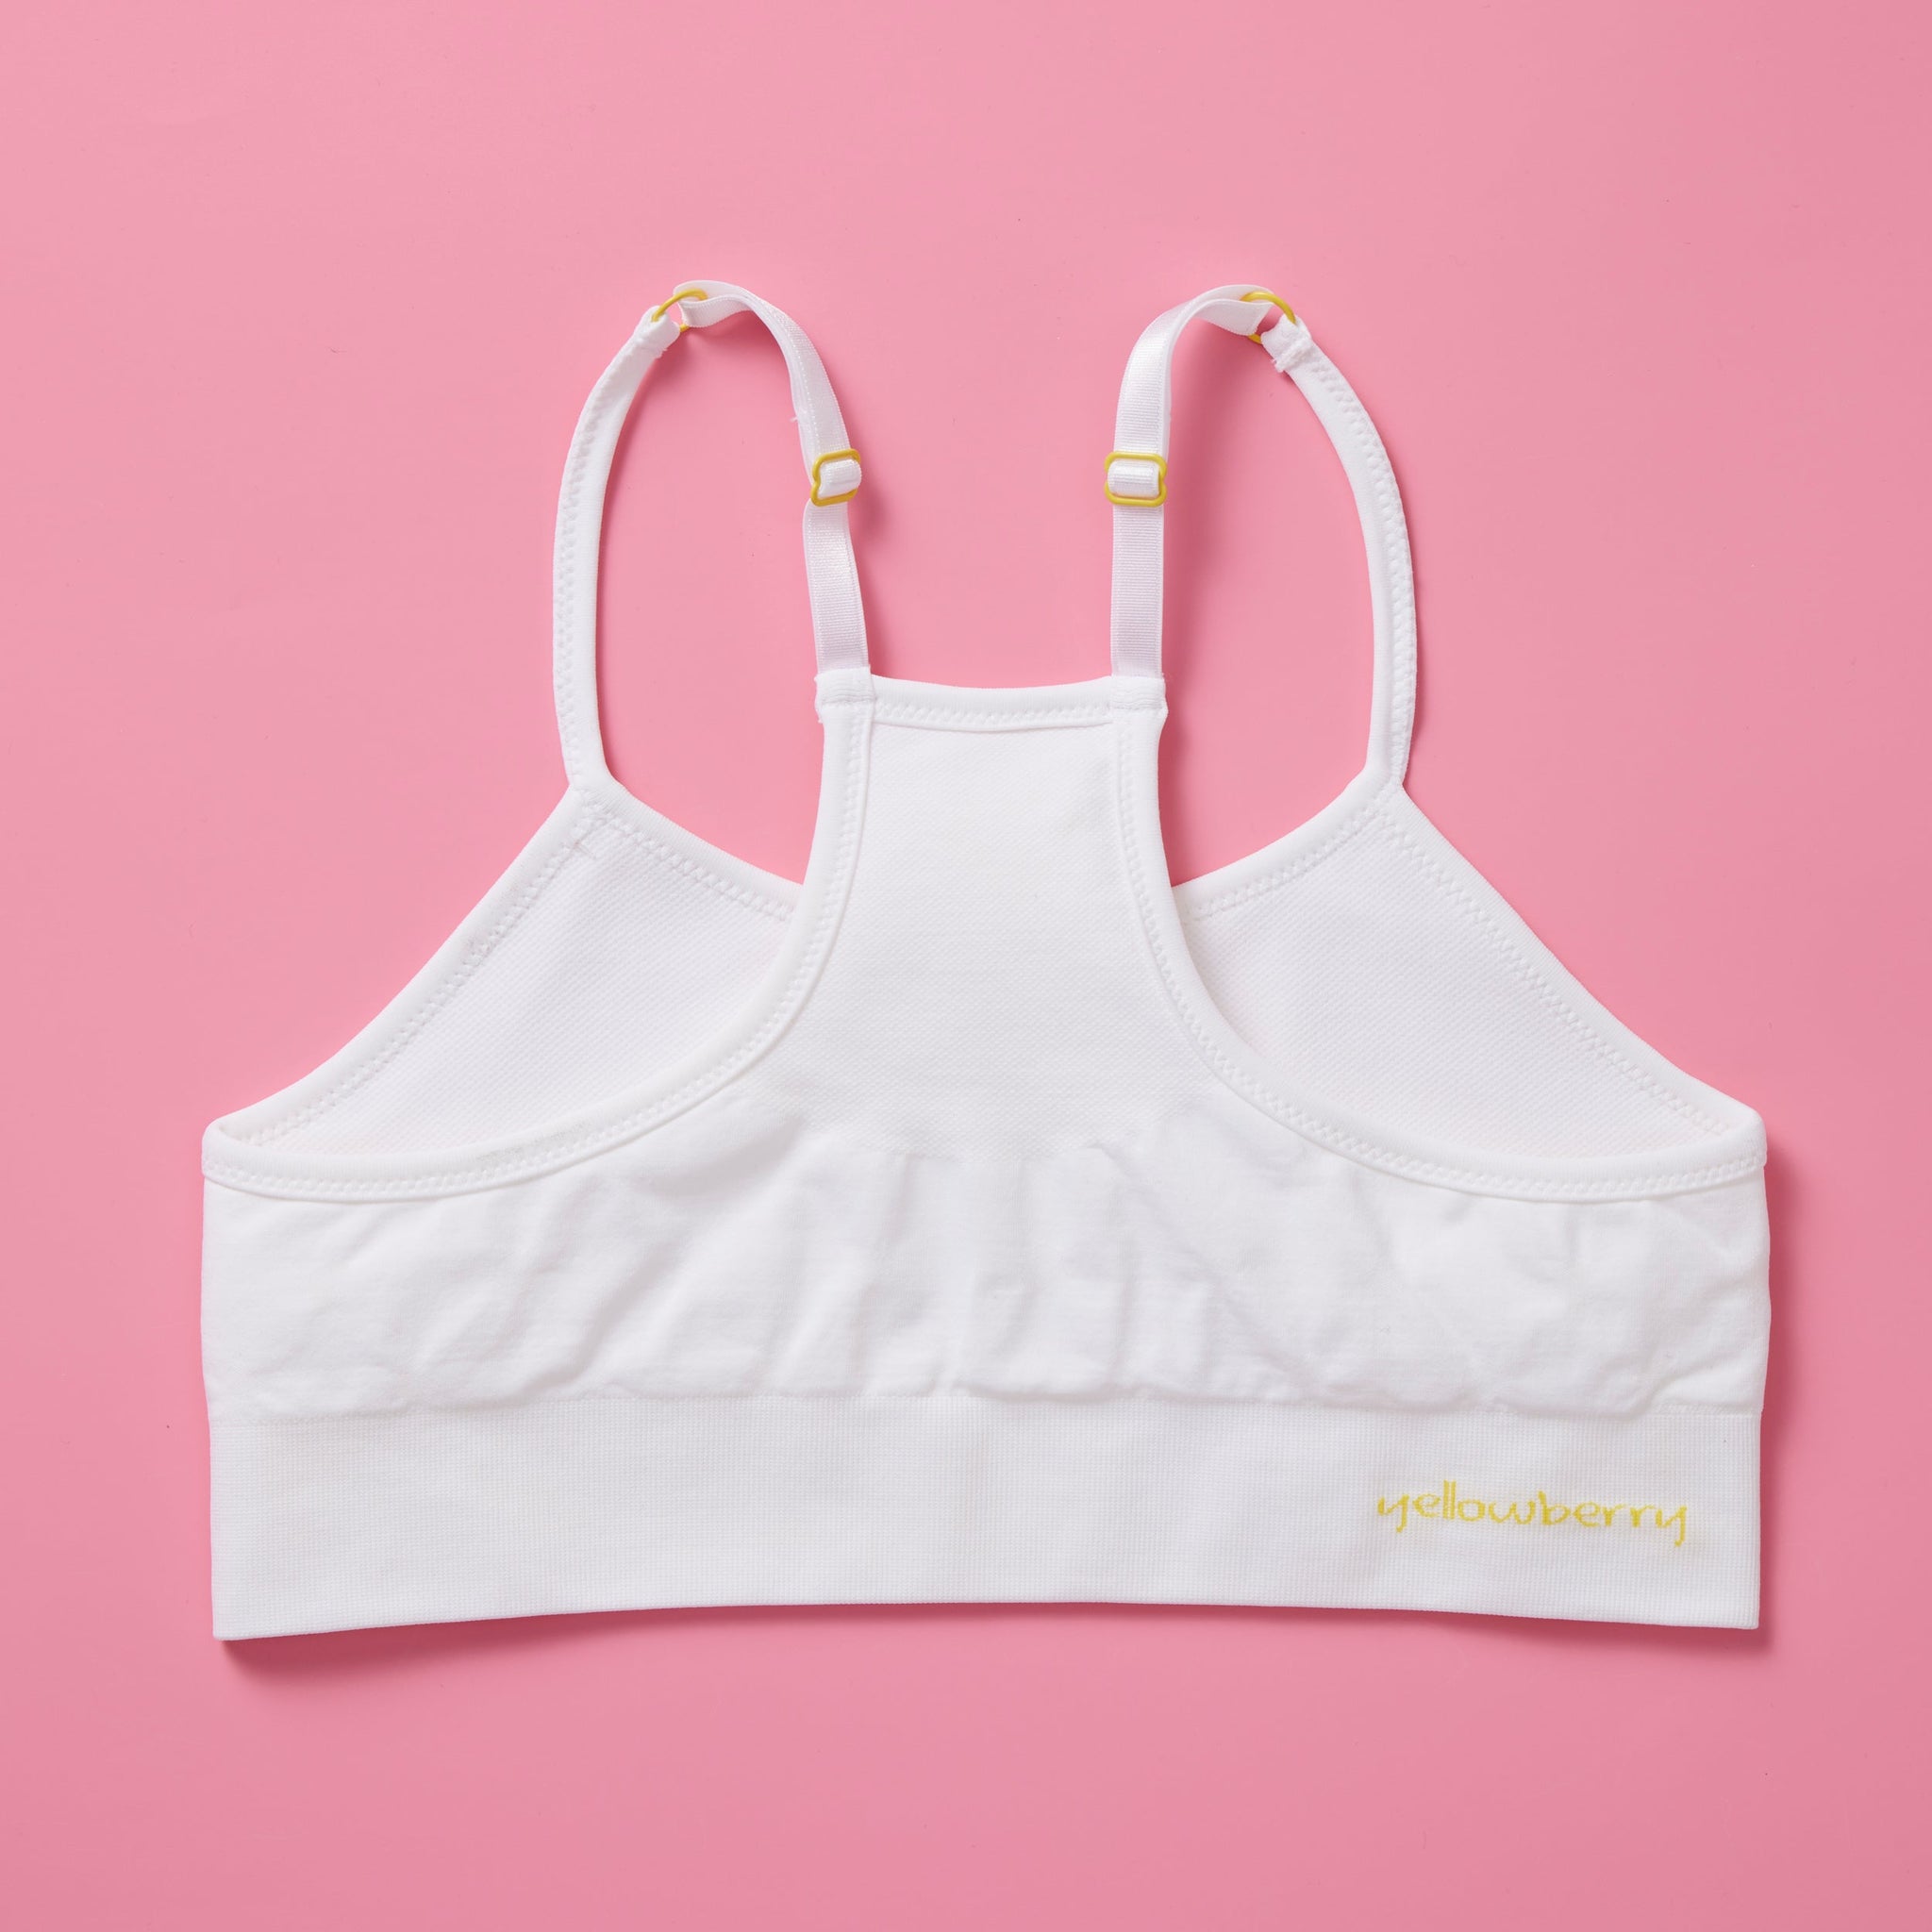 Tween Bras - Yellowberry Bras for Tweens and Girls. Best bra for girls  Tagged earth